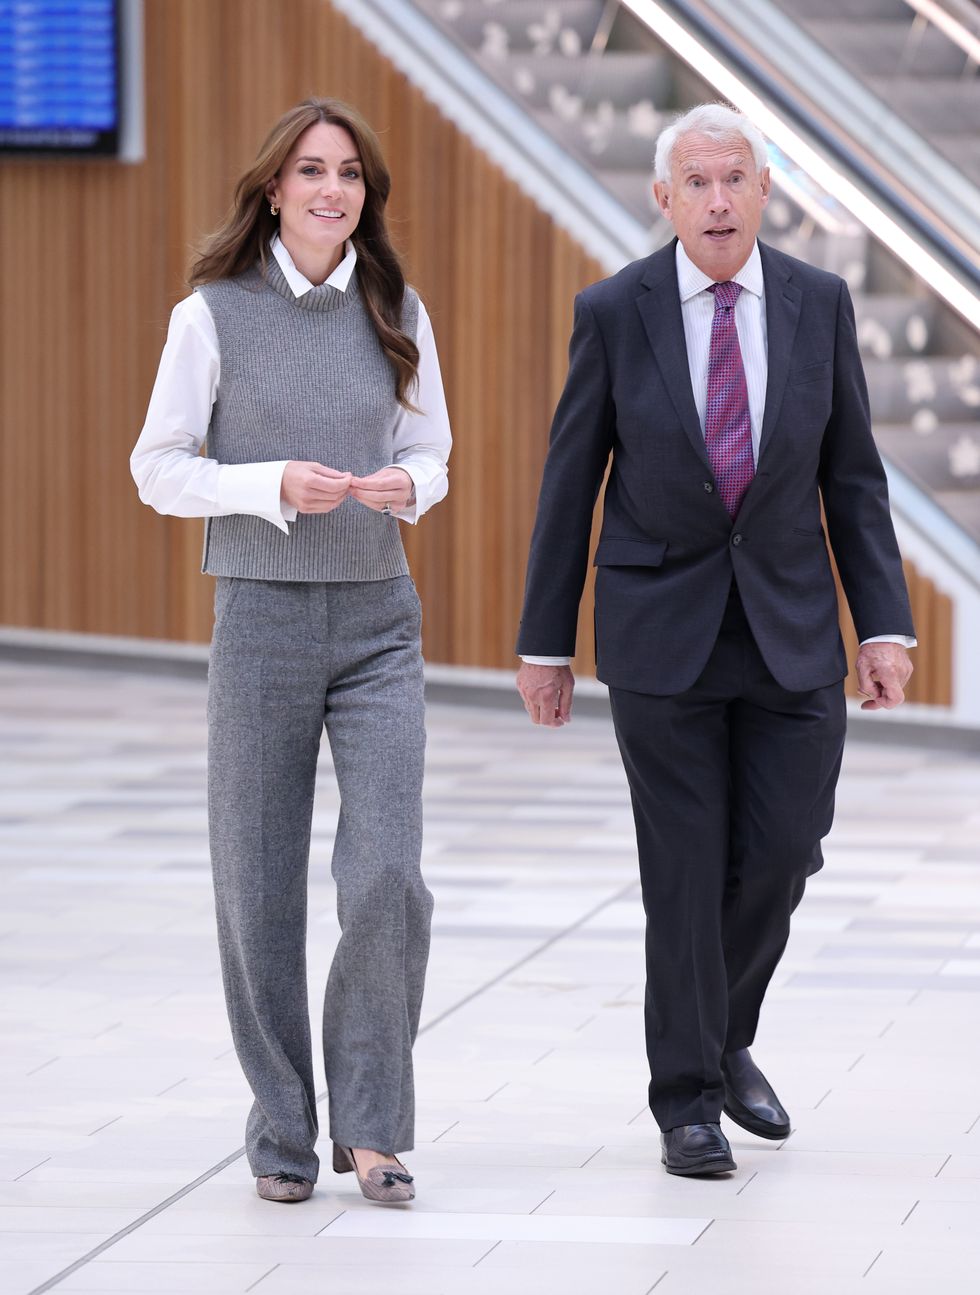 kate middleton con chaleco gris y camisa blanca